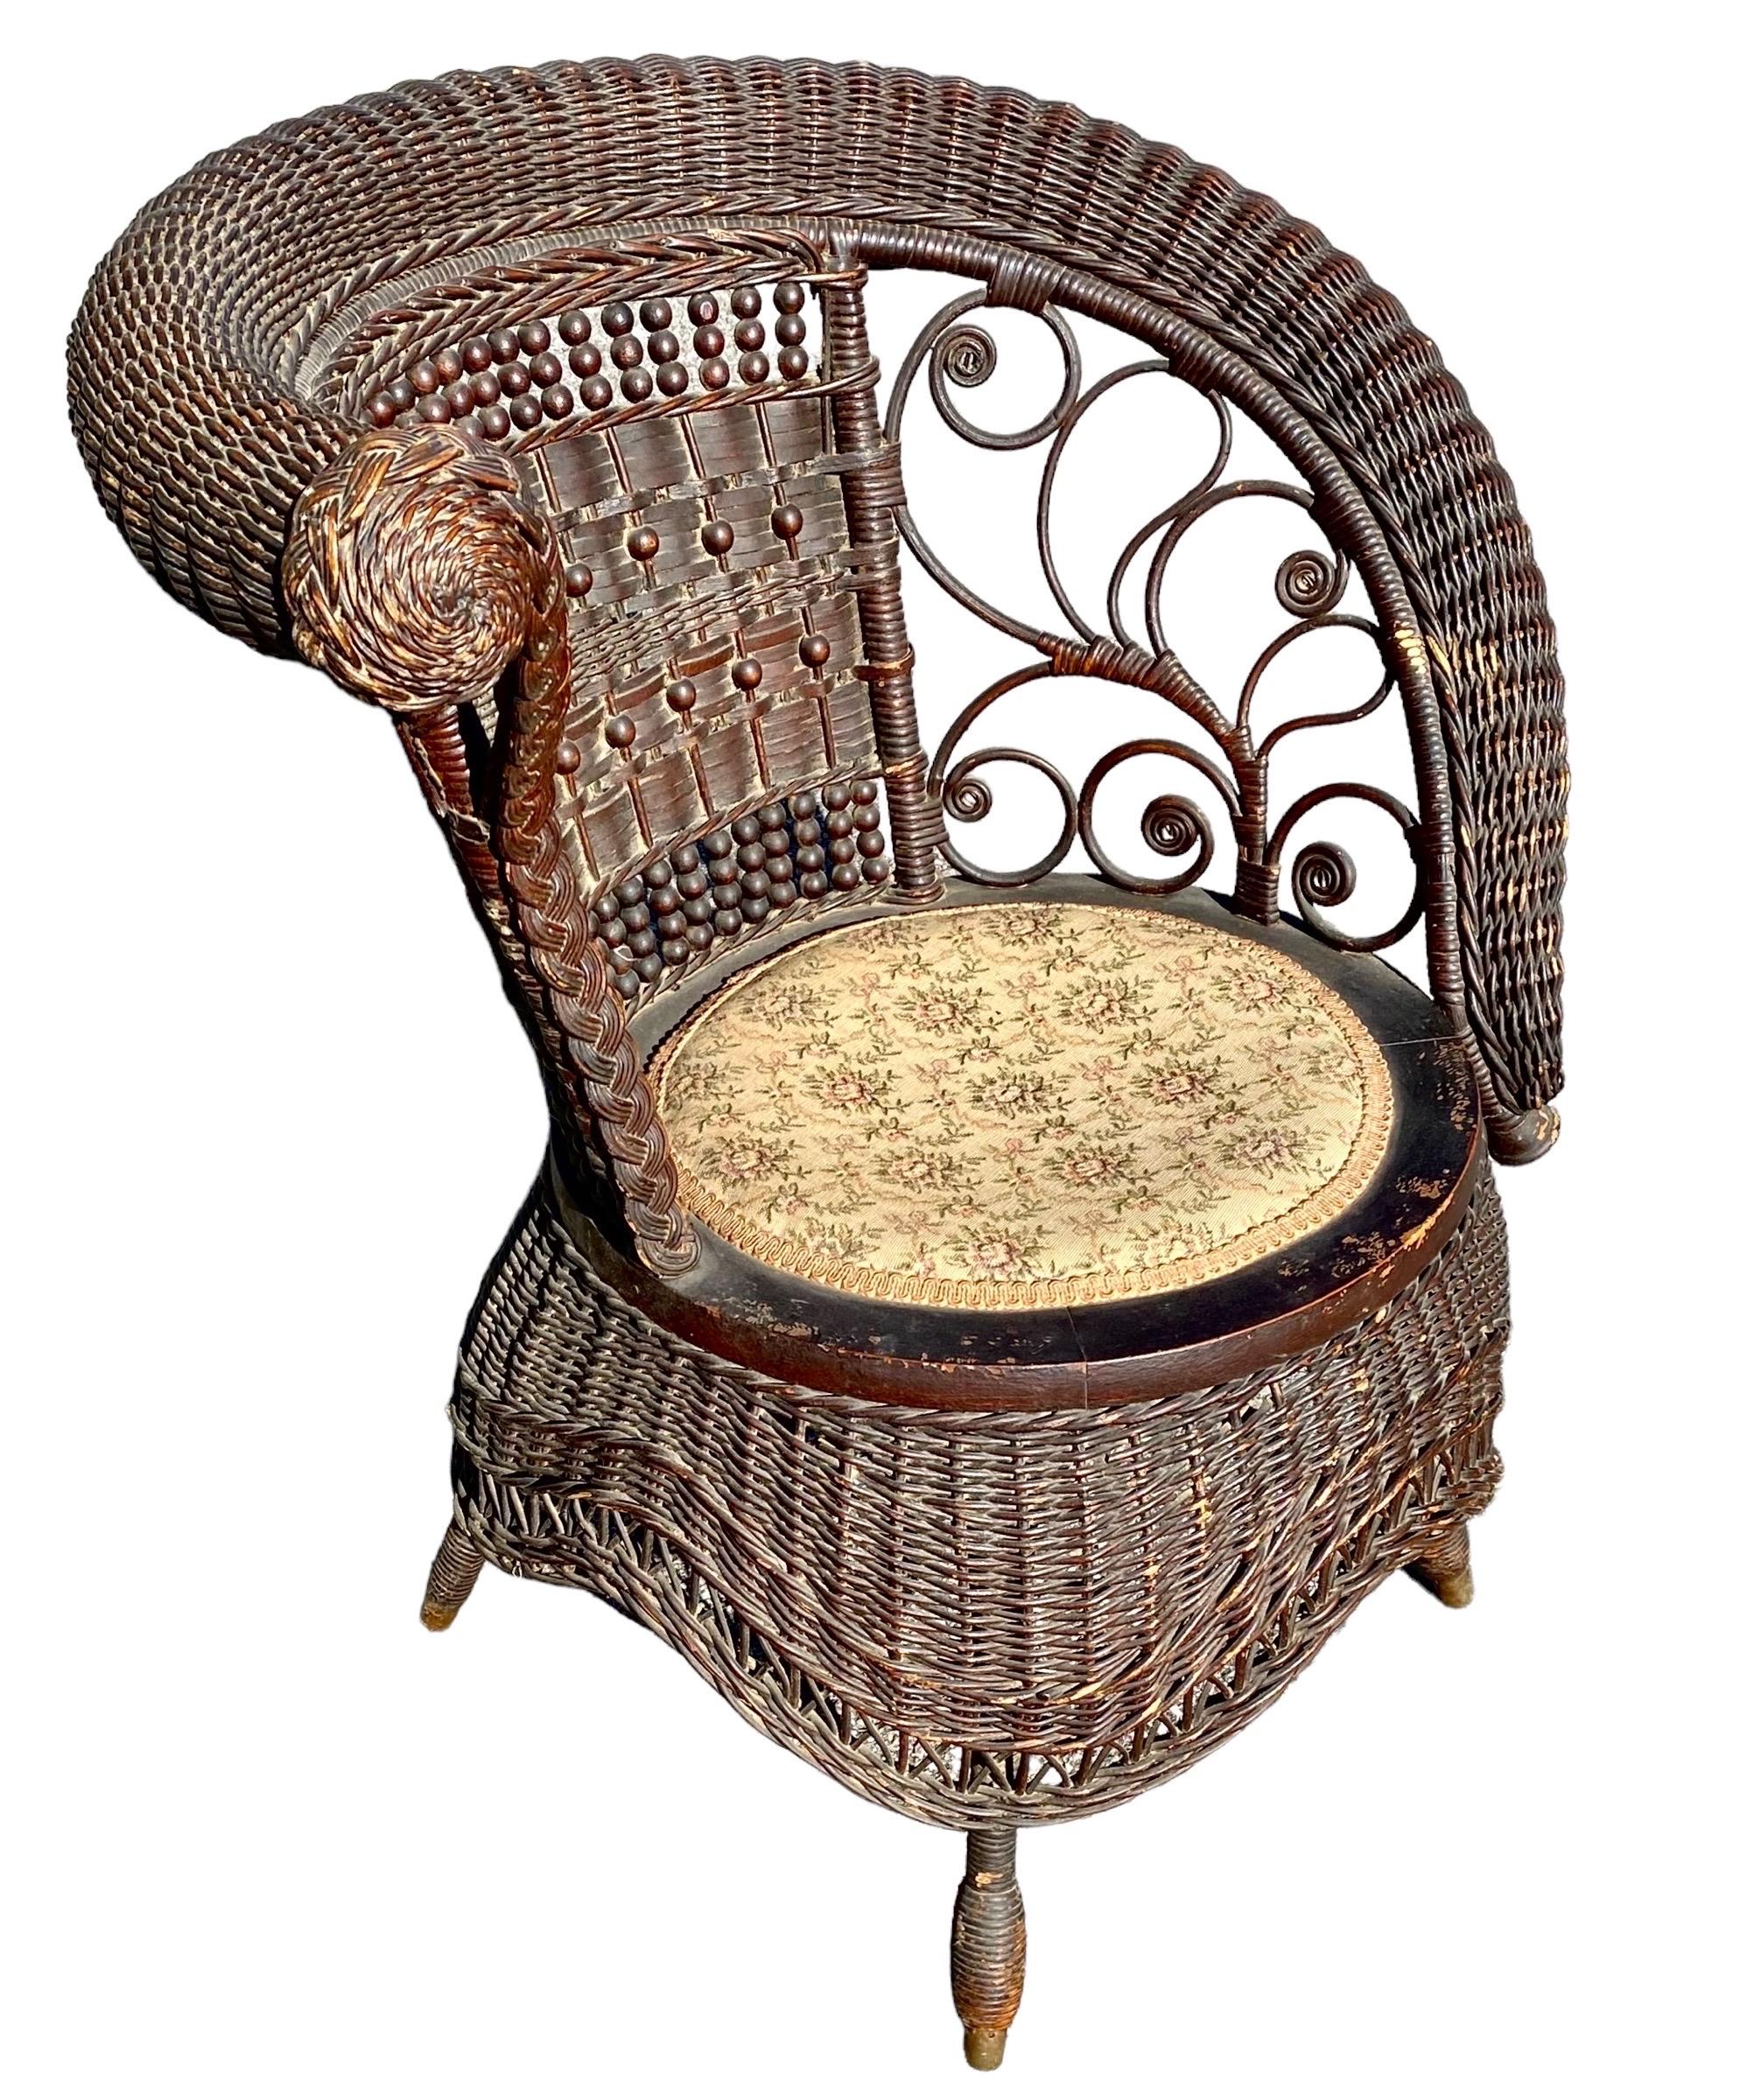 Jenkins & Phipps stick and ball wicker photographers or portrait chair with asymmetrical scrolled right arm and fiddleheads, woven skirt, and woven beaded front legs.  Jenkins-Phipps label on underside, dating this chair from between 1903 and 1918.